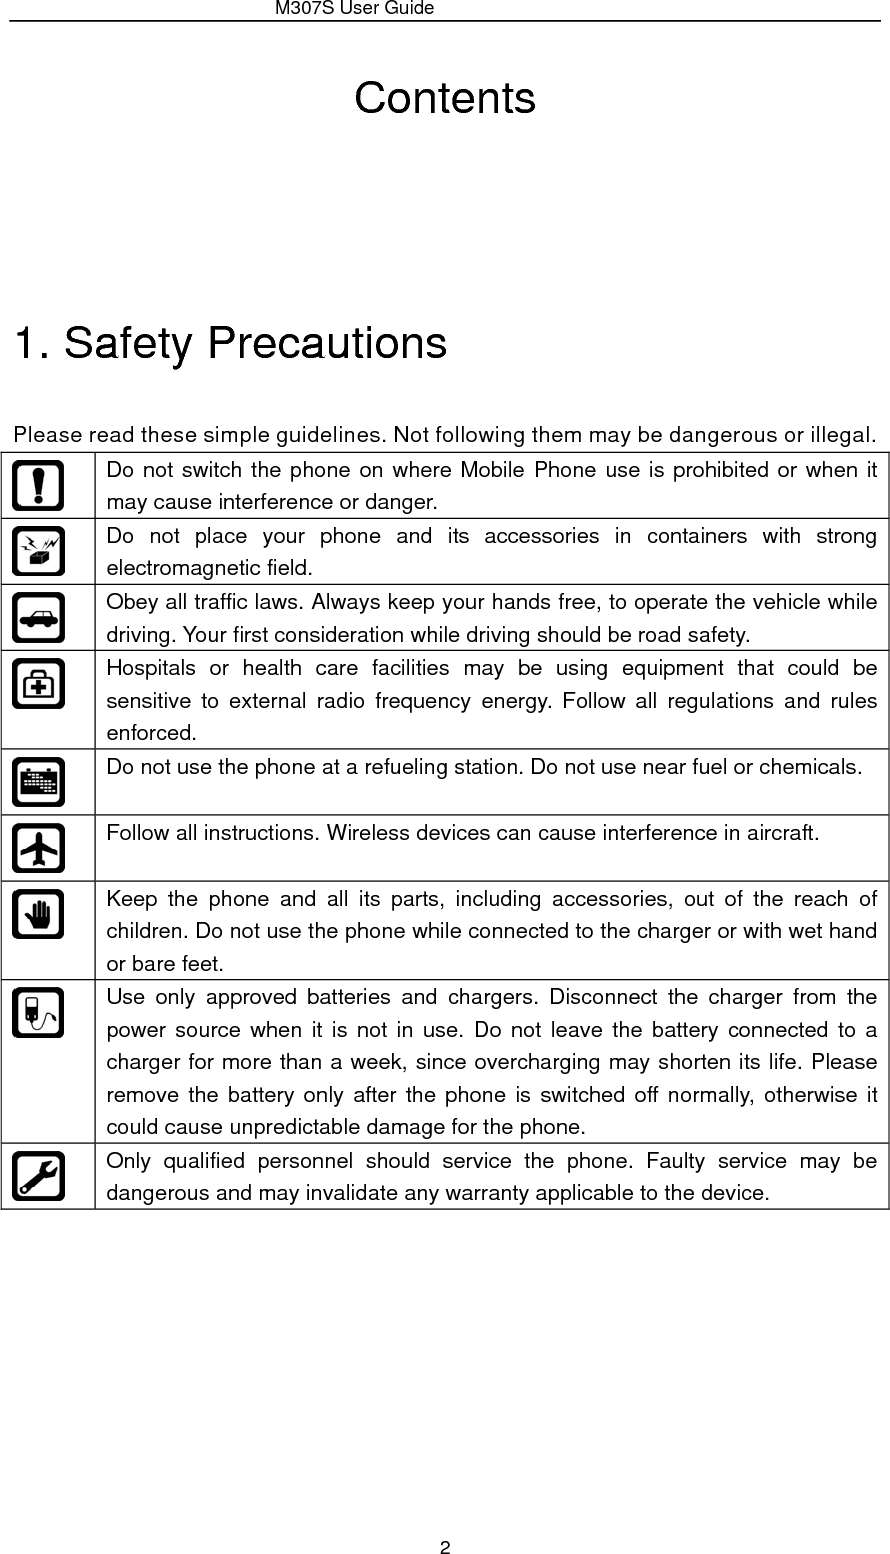                 M307S User Guide 2 Contents    1. Safety Precautions   Please read these simple guidelines. Not following them may be dangerous or illegal.  Do not switch the phone on where Mobile Phone use is prohibited or when it may cause interference or danger.  Do not place your phone and its accessories in containers with strong electromagnetic field.  Obey all traffic laws. Always keep your hands free, to operate the vehicle while driving. Your first consideration while driving should be road safety.  Hospitals or health care facilities may be using equipment that could be sensitive to external radio frequency energy. Follow all regulations and rules enforced.  Do not use the phone at a refueling station. Do not use near fuel or chemicals.  Follow all instructions. Wireless devices can cause interference in aircraft.  Keep the phone and all its parts, including accessories, out of the reach of children. Do not use the phone while connected to the charger or with wet hand or bare feet.  Use only approved batteries and chargers. Disconnect the charger from the power source when it is not in use. Do not leave the battery connected to a charger for more than a week, since overcharging may shorten its life. Please remove the battery only after the phone is switched off normally, otherwise it could cause unpredictable damage for the phone.  Only qualified personnel should service the phone. Faulty service may be dangerous and may invalidate any warranty applicable to the device.          